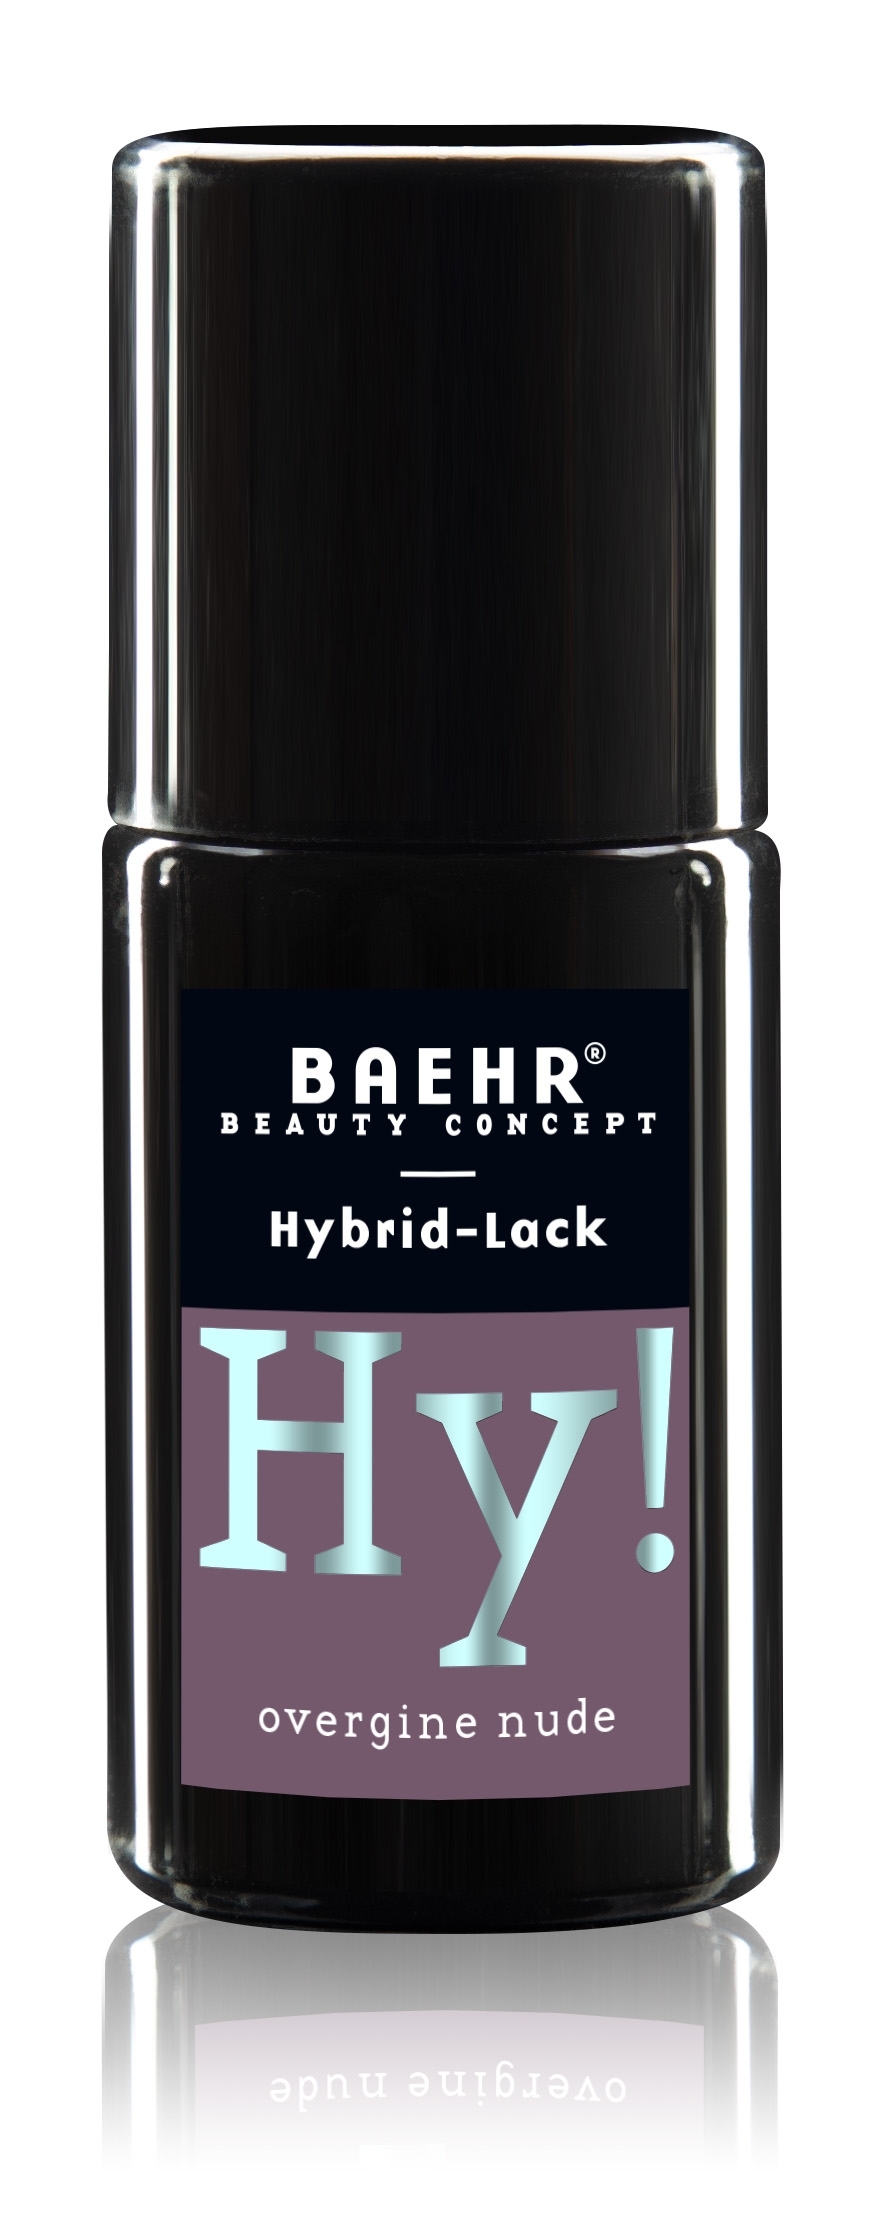 BAEHR BEAUTY CONCEPT - NAILS Hy! Hybrid-Lack, overvigne nude 8 ml